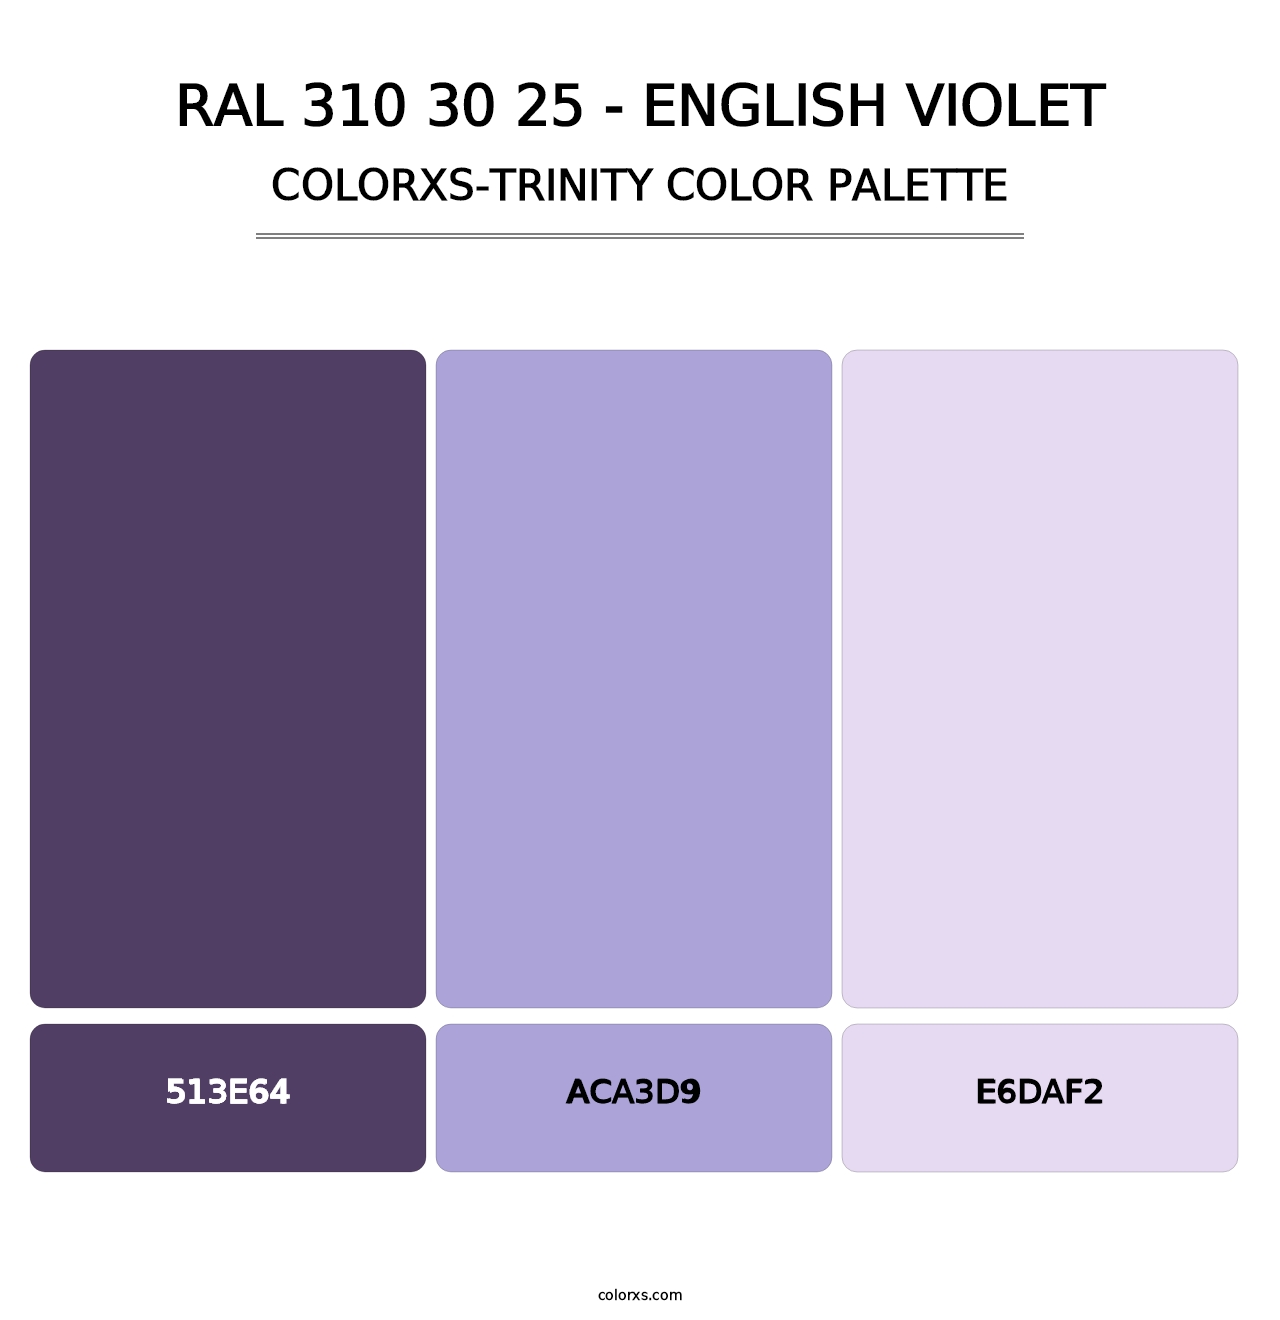 RAL 310 30 25 - English Violet - Colorxs Trinity Palette